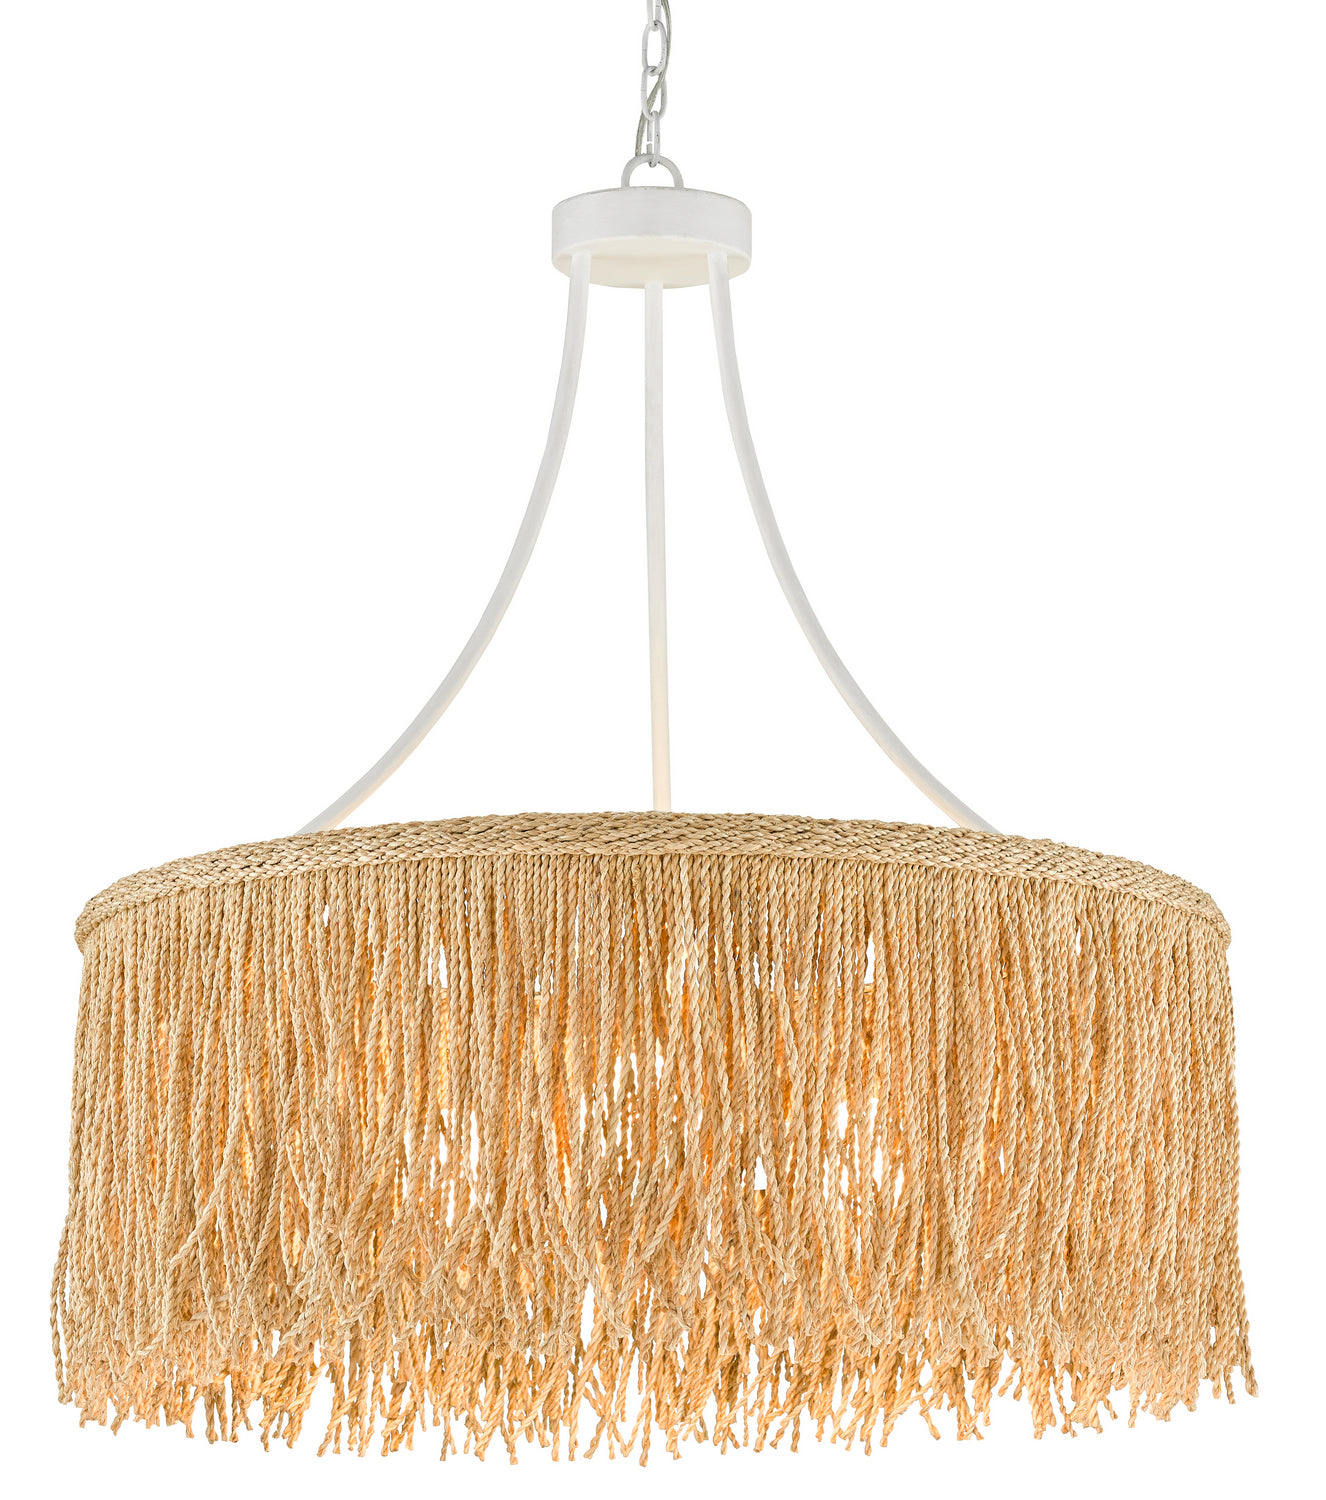 Three Light Chandelier from the Samoa collection in Gesso White/Natural Rope finish